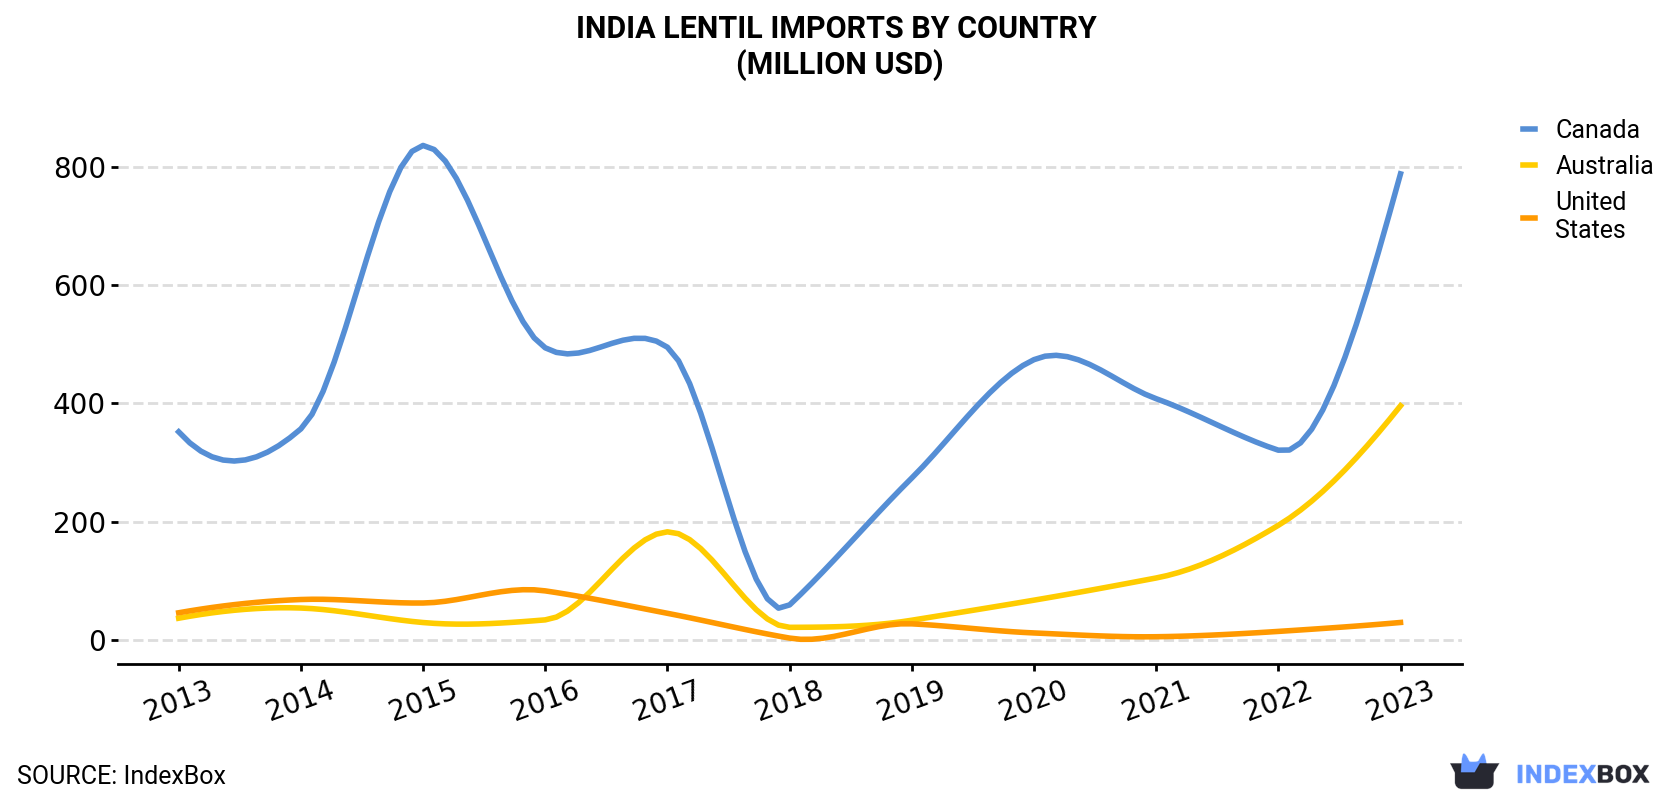 India Lentil Imports By Country (Million USD)